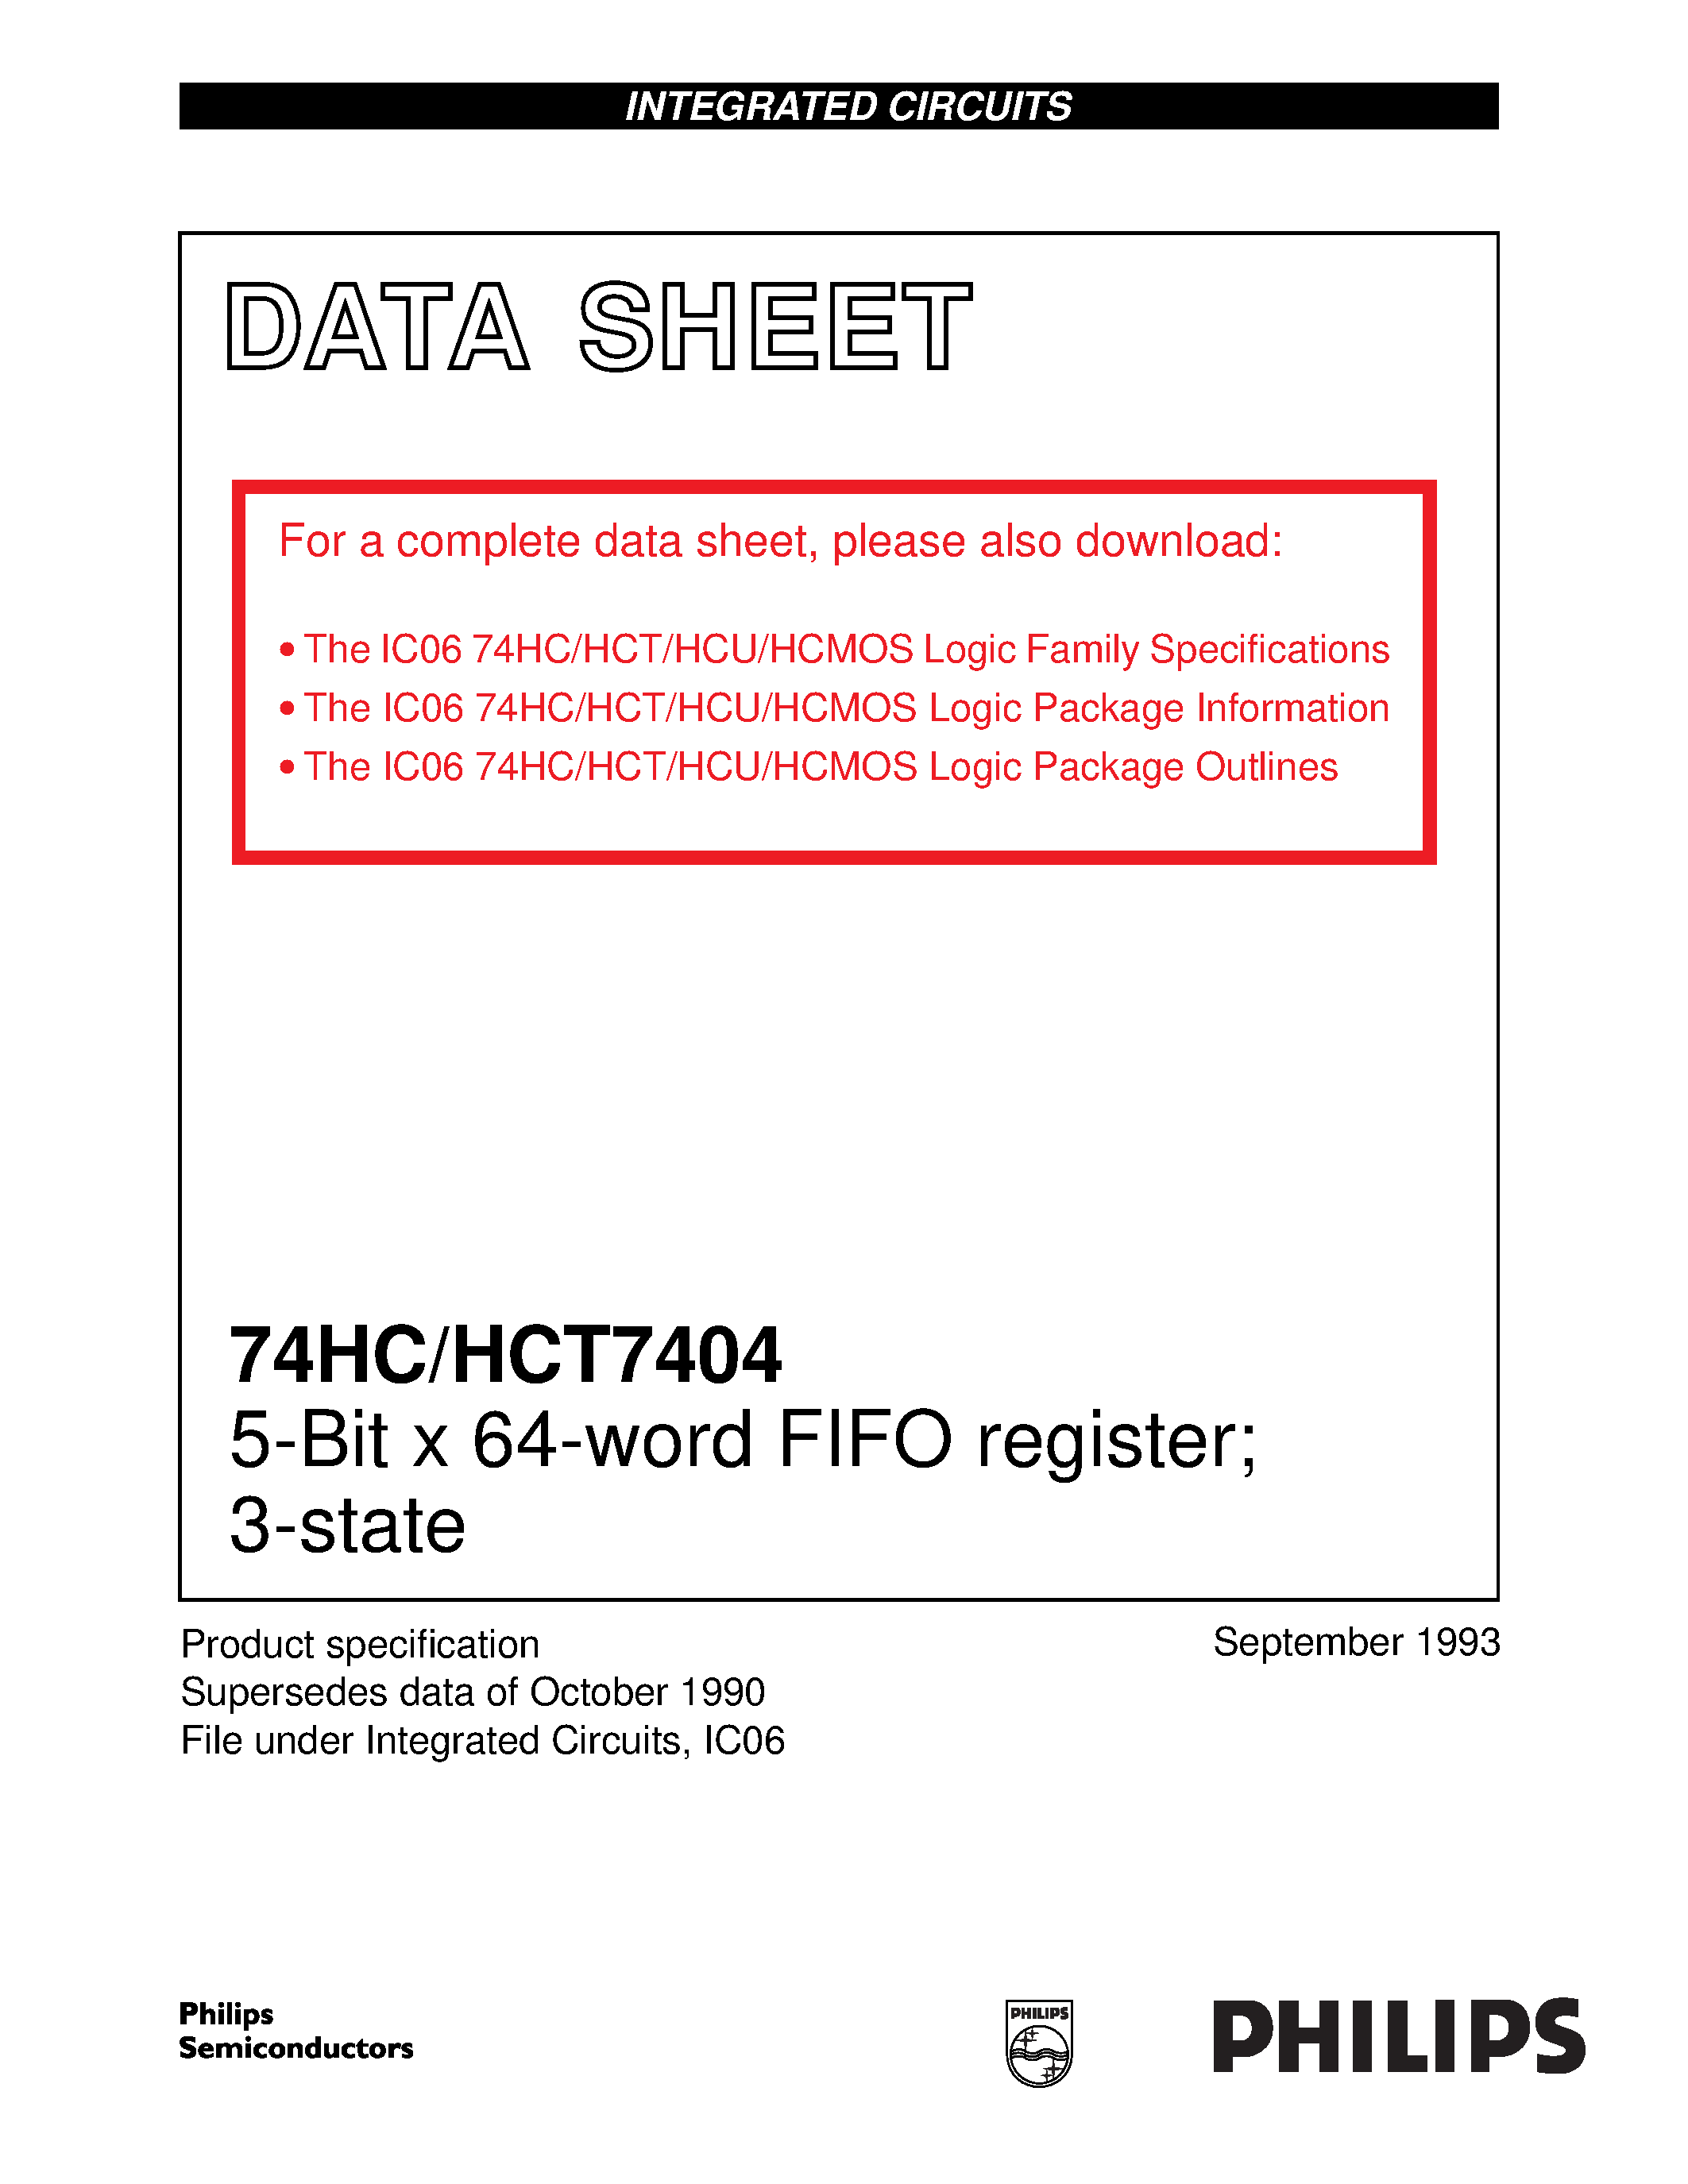 Datasheet 74HCT7404 - 5-Bit x 64-word FIFO register; 3-state page 1